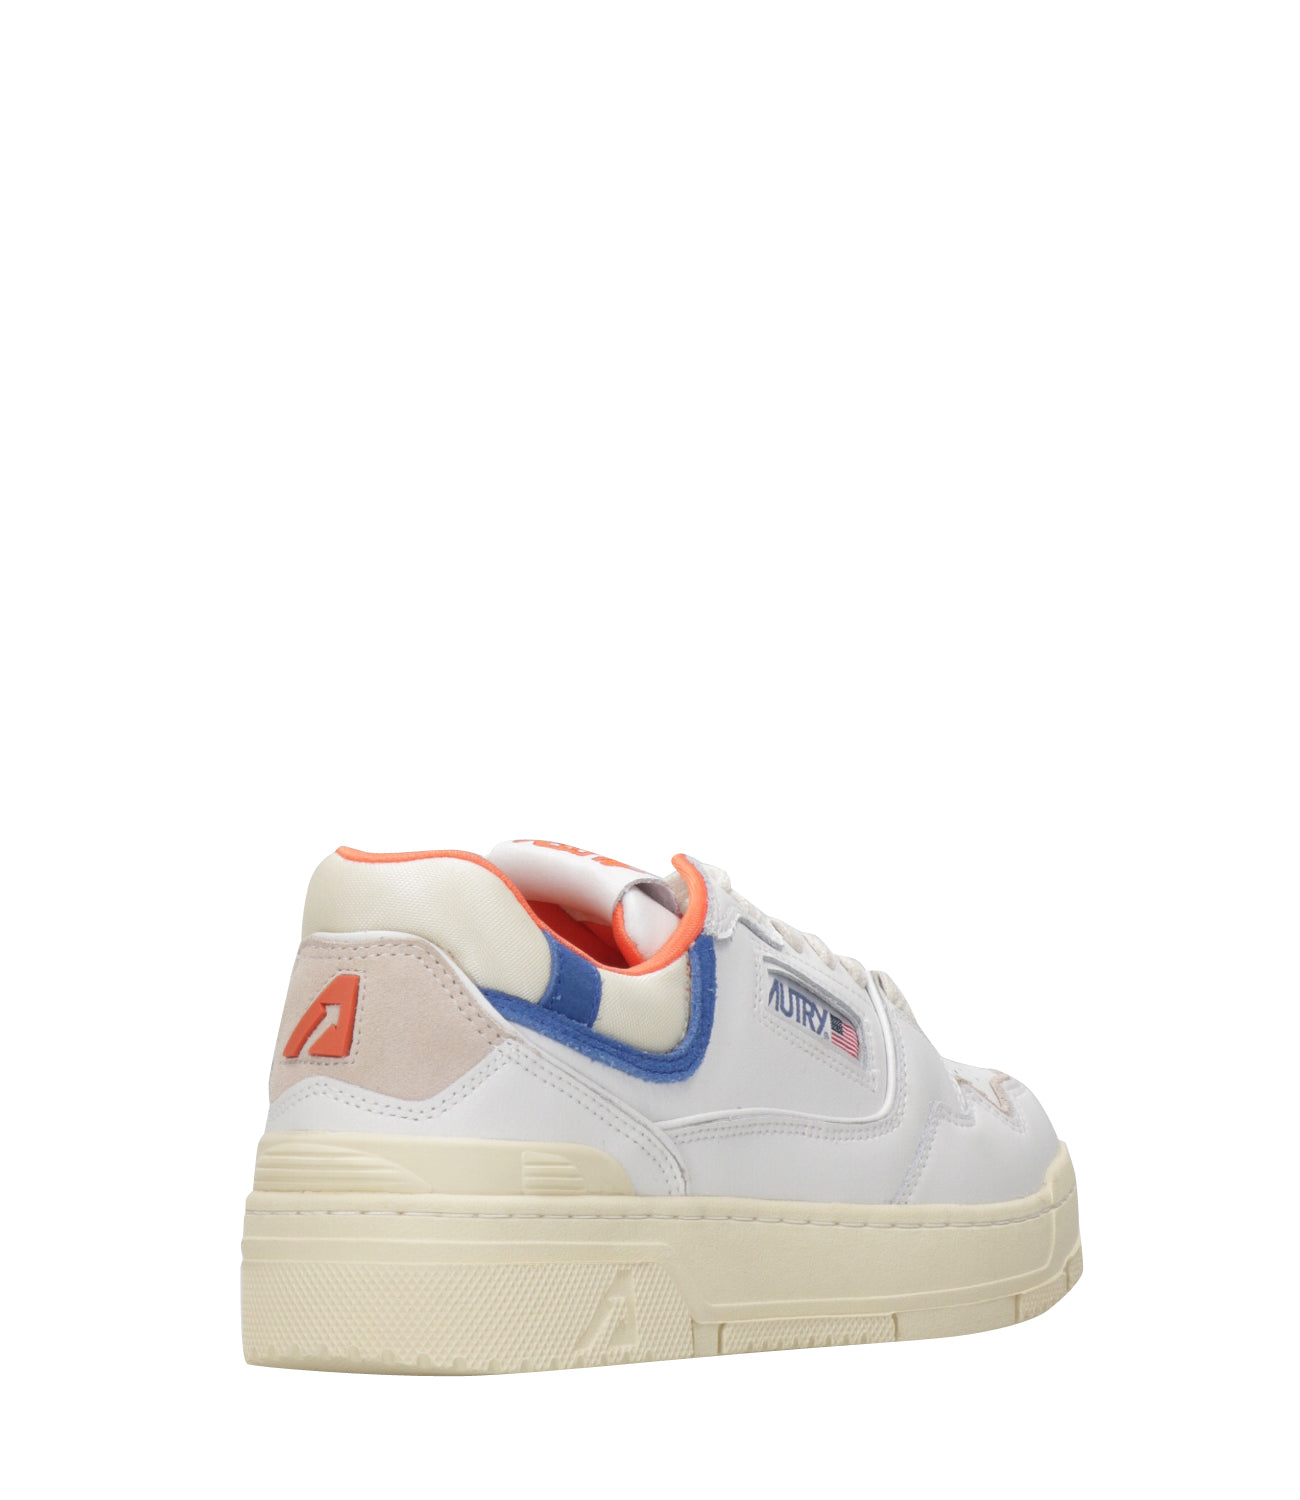 Autry | Sneakers Clc White Orange and Blue